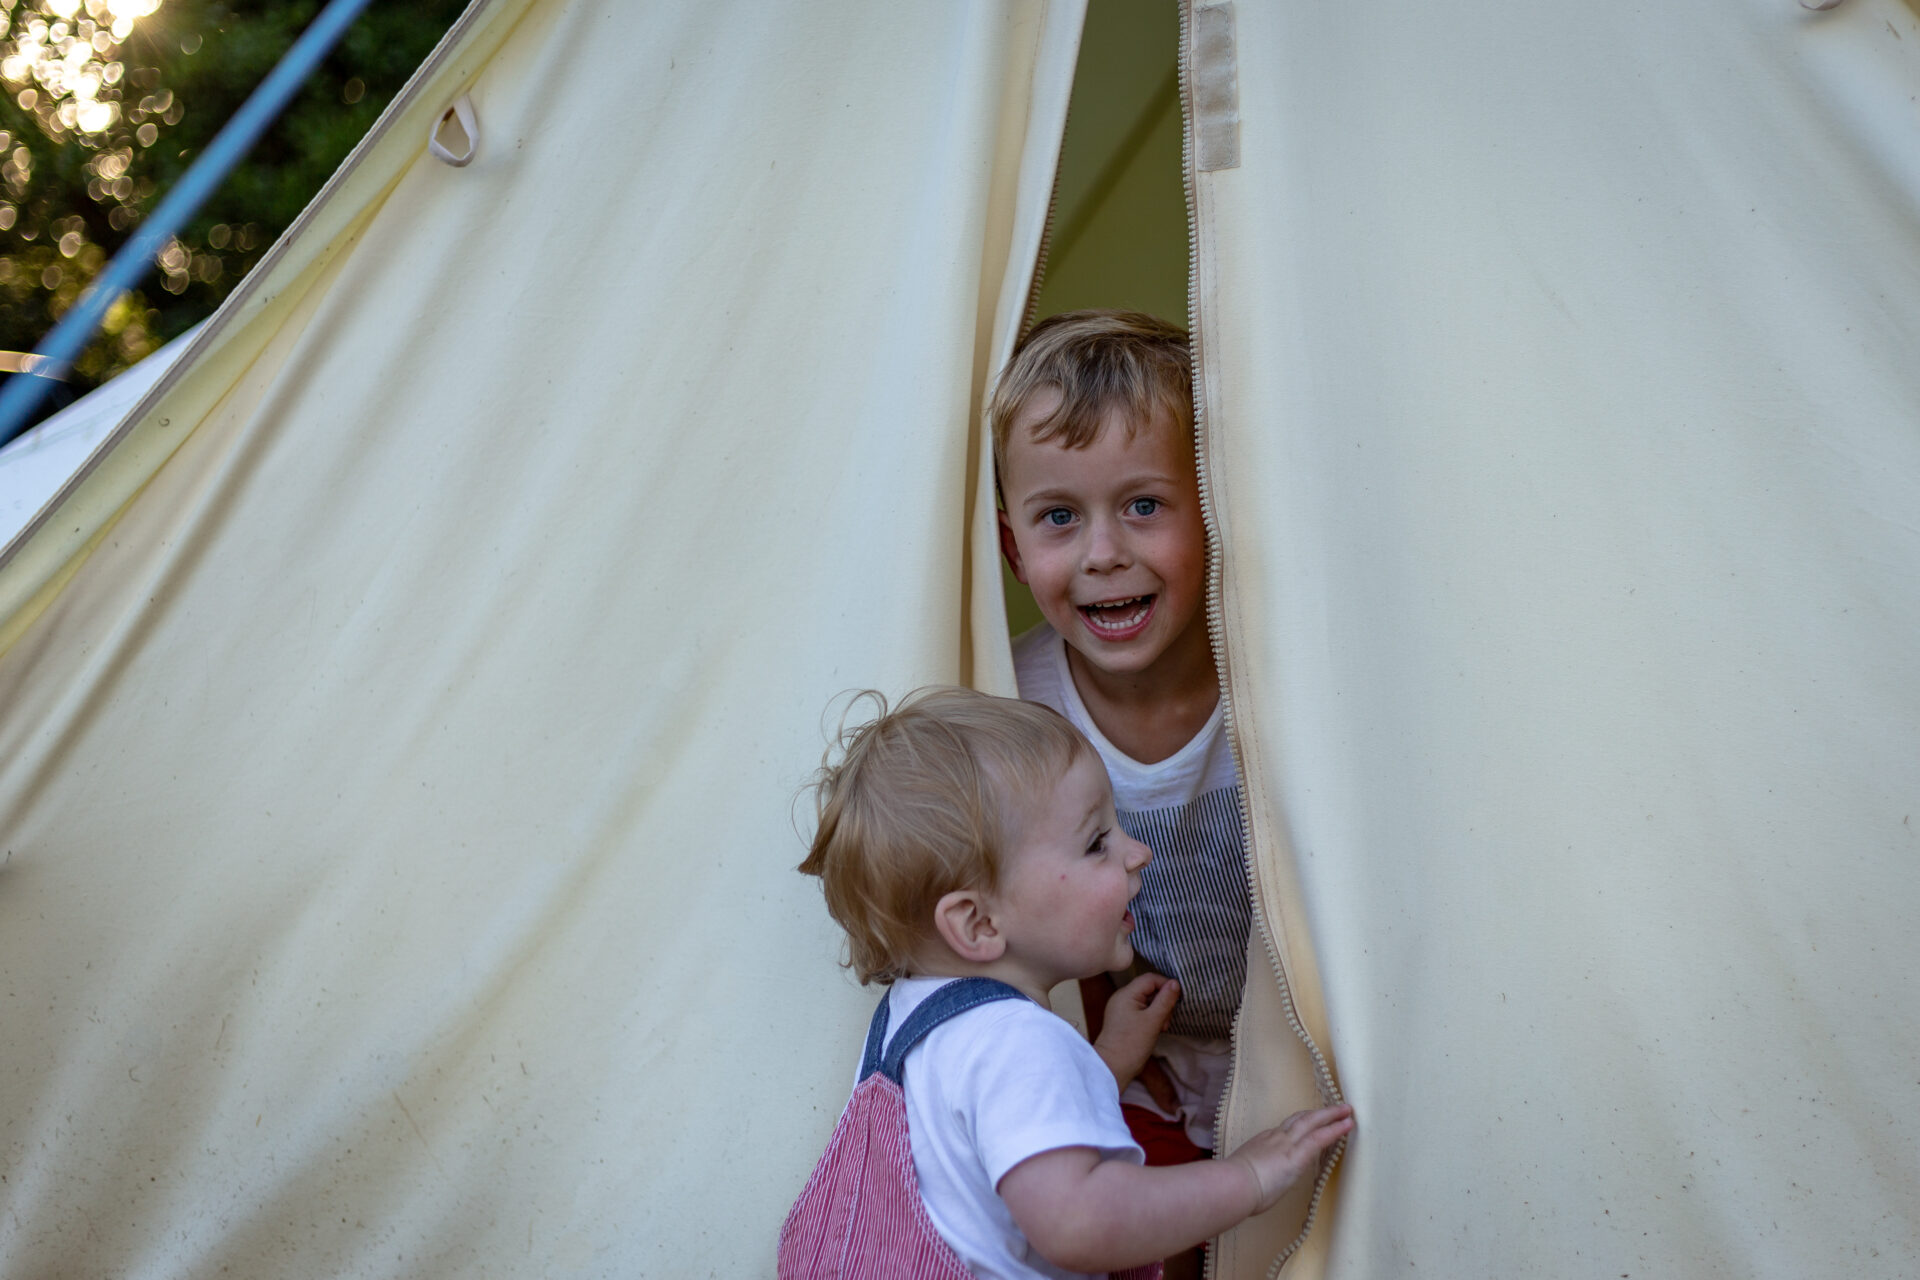 dilham hall retreats at home with nature camping and bell tents tonnage bridge glamping couples norfolk broads dilham hall retreats luxury canoe hire nature luxury  holiday weekend children dogs